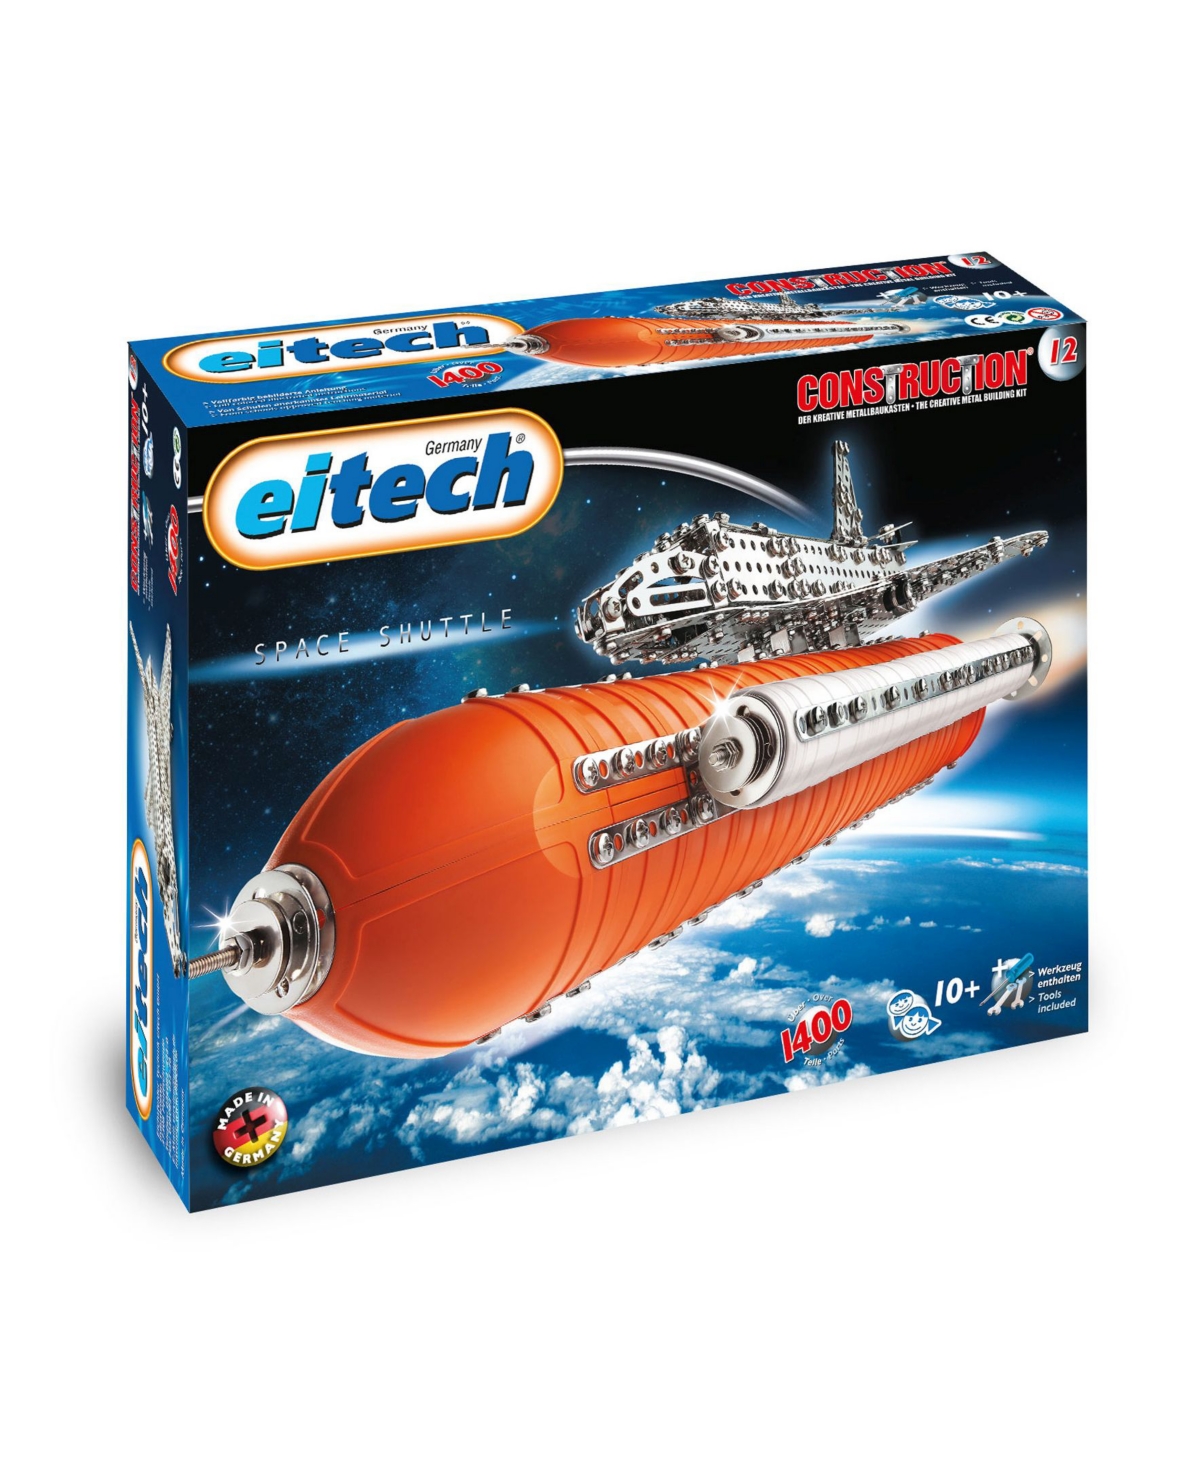 Eitech Exclusive Series Deluxe Space Shuttle In Silver